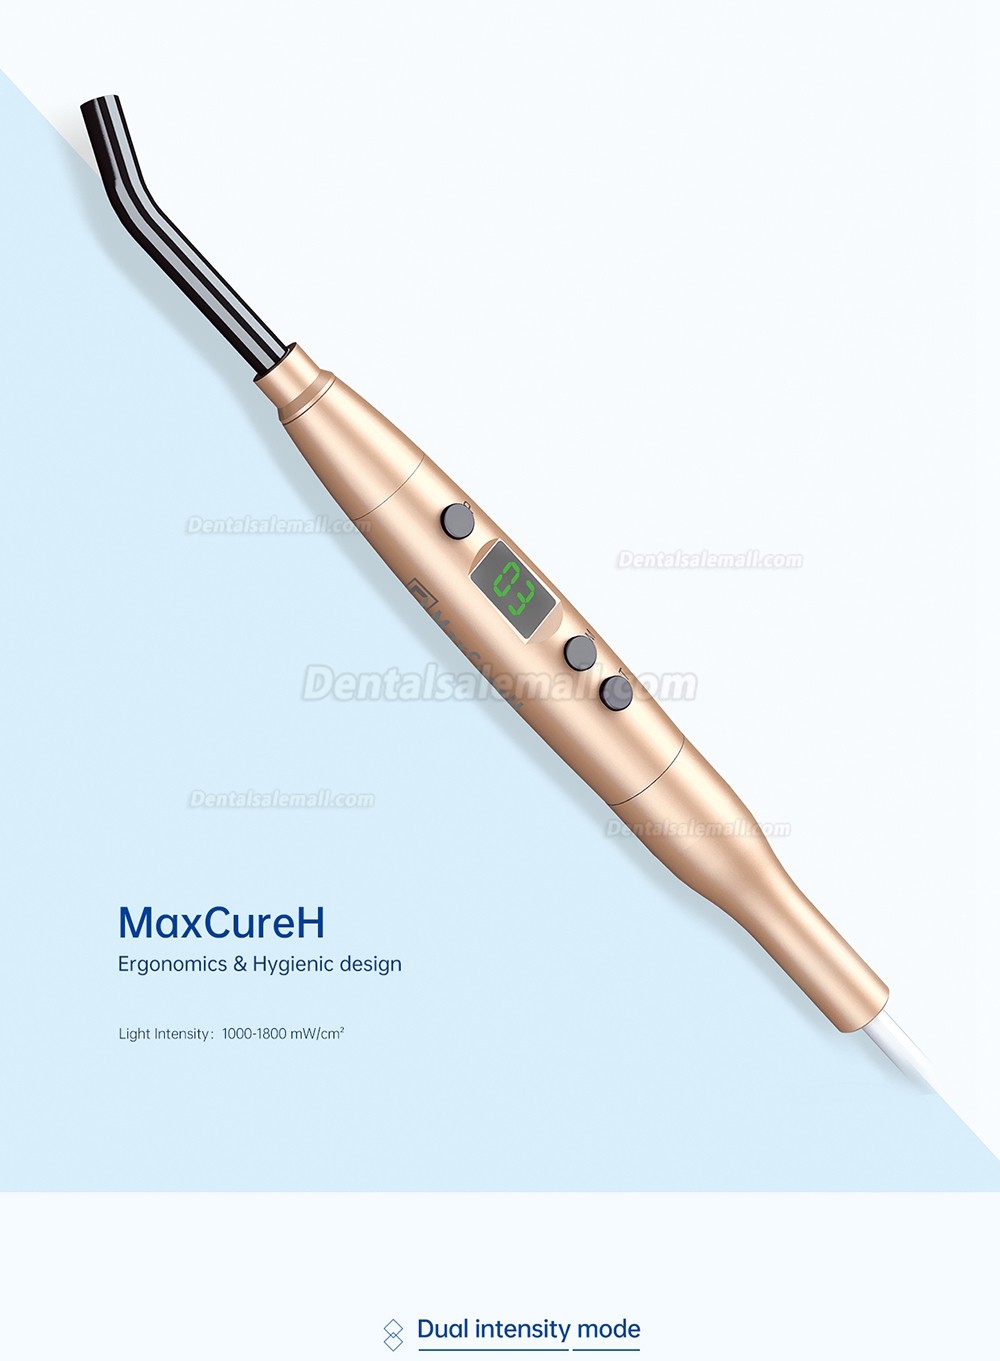 Refine MaxCureH Dental Wired LED Curging Light 1600-1800mw/cm2